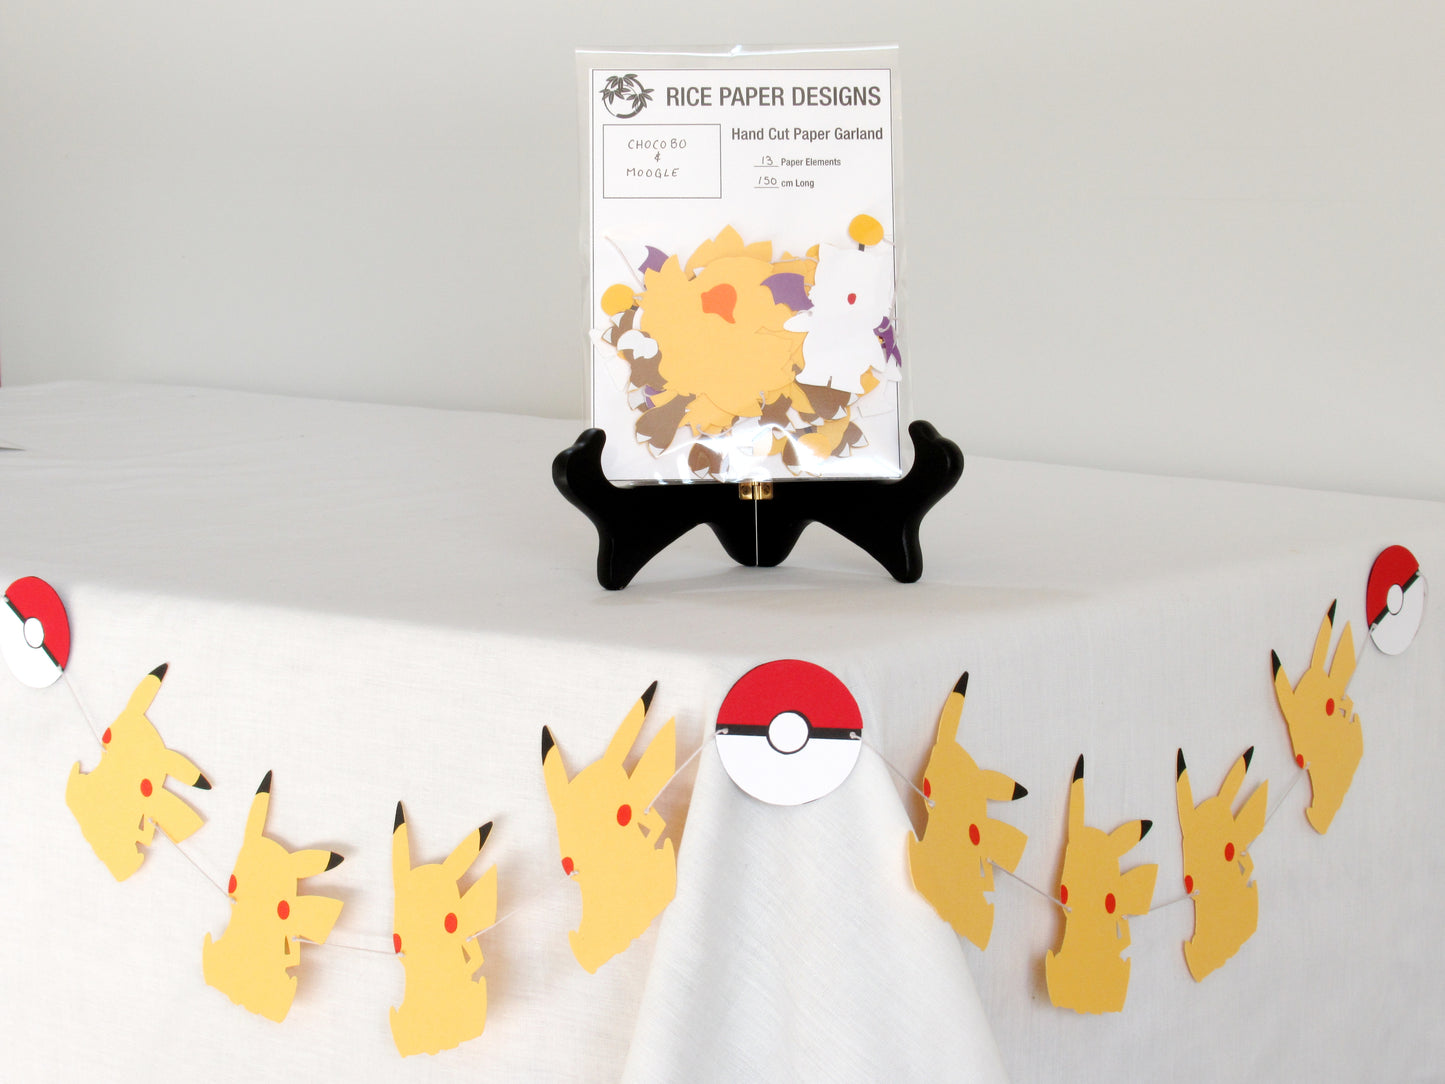 A garland with a series of paper chocobo and moogles arranged in neat bundle inside a clear bag. There is a paper behind them showing the Rice Paper Designs logo, and information about the garland. The bag is on a table, and below it is a sample garland with pikachu hung up.